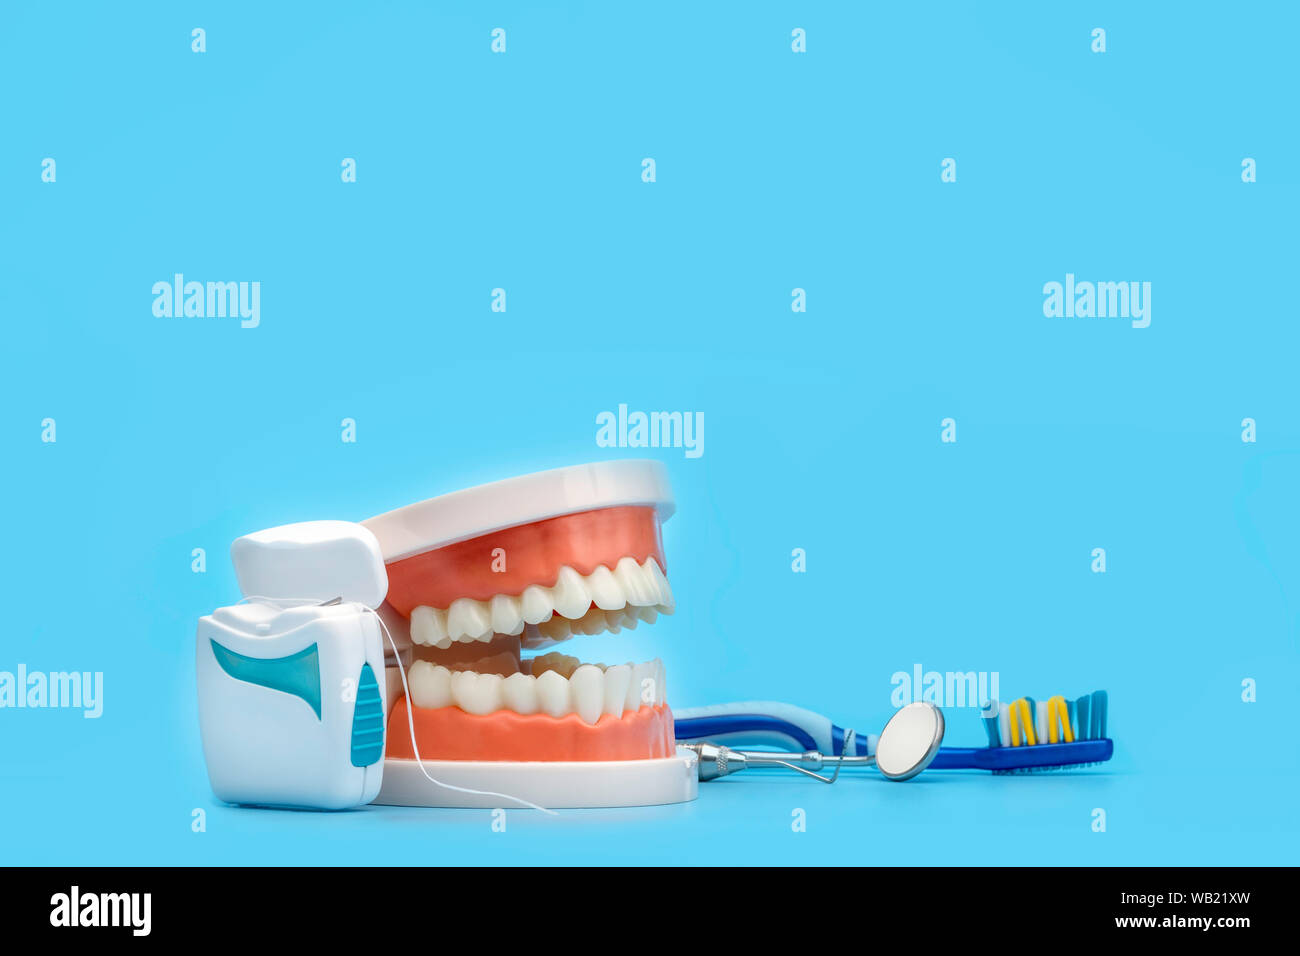 Dental jaw demonstration model with dentist tools floss and toothbrush isolate on blue background. Conceptual image with copy space. Stock Photo